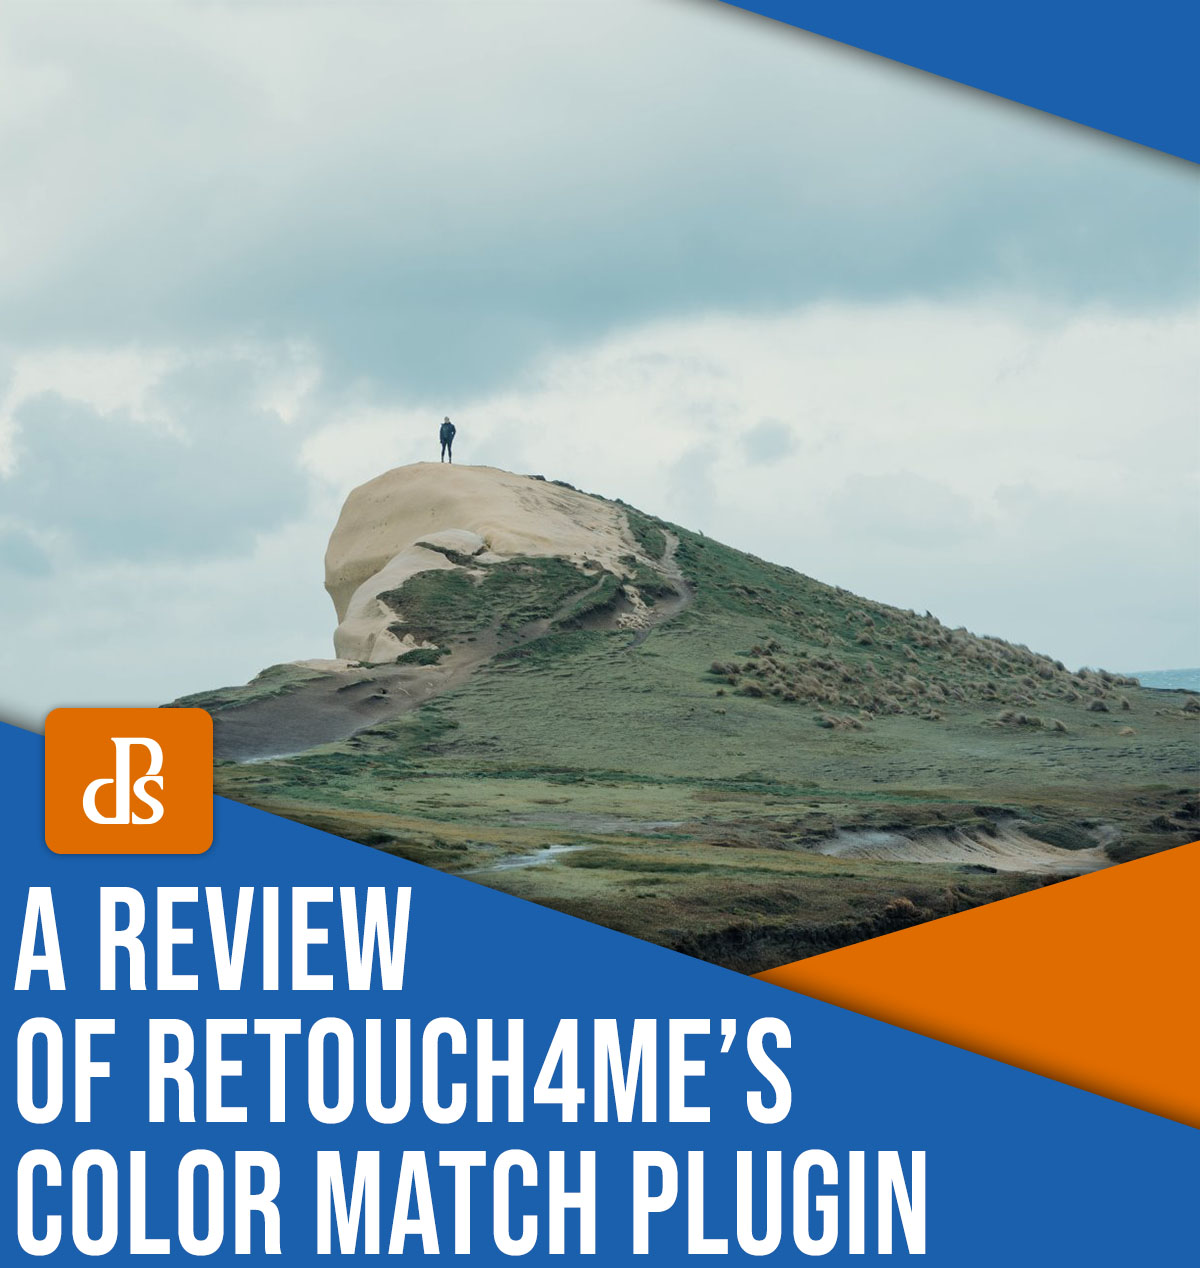 A review of Retouch4me's color match plugin